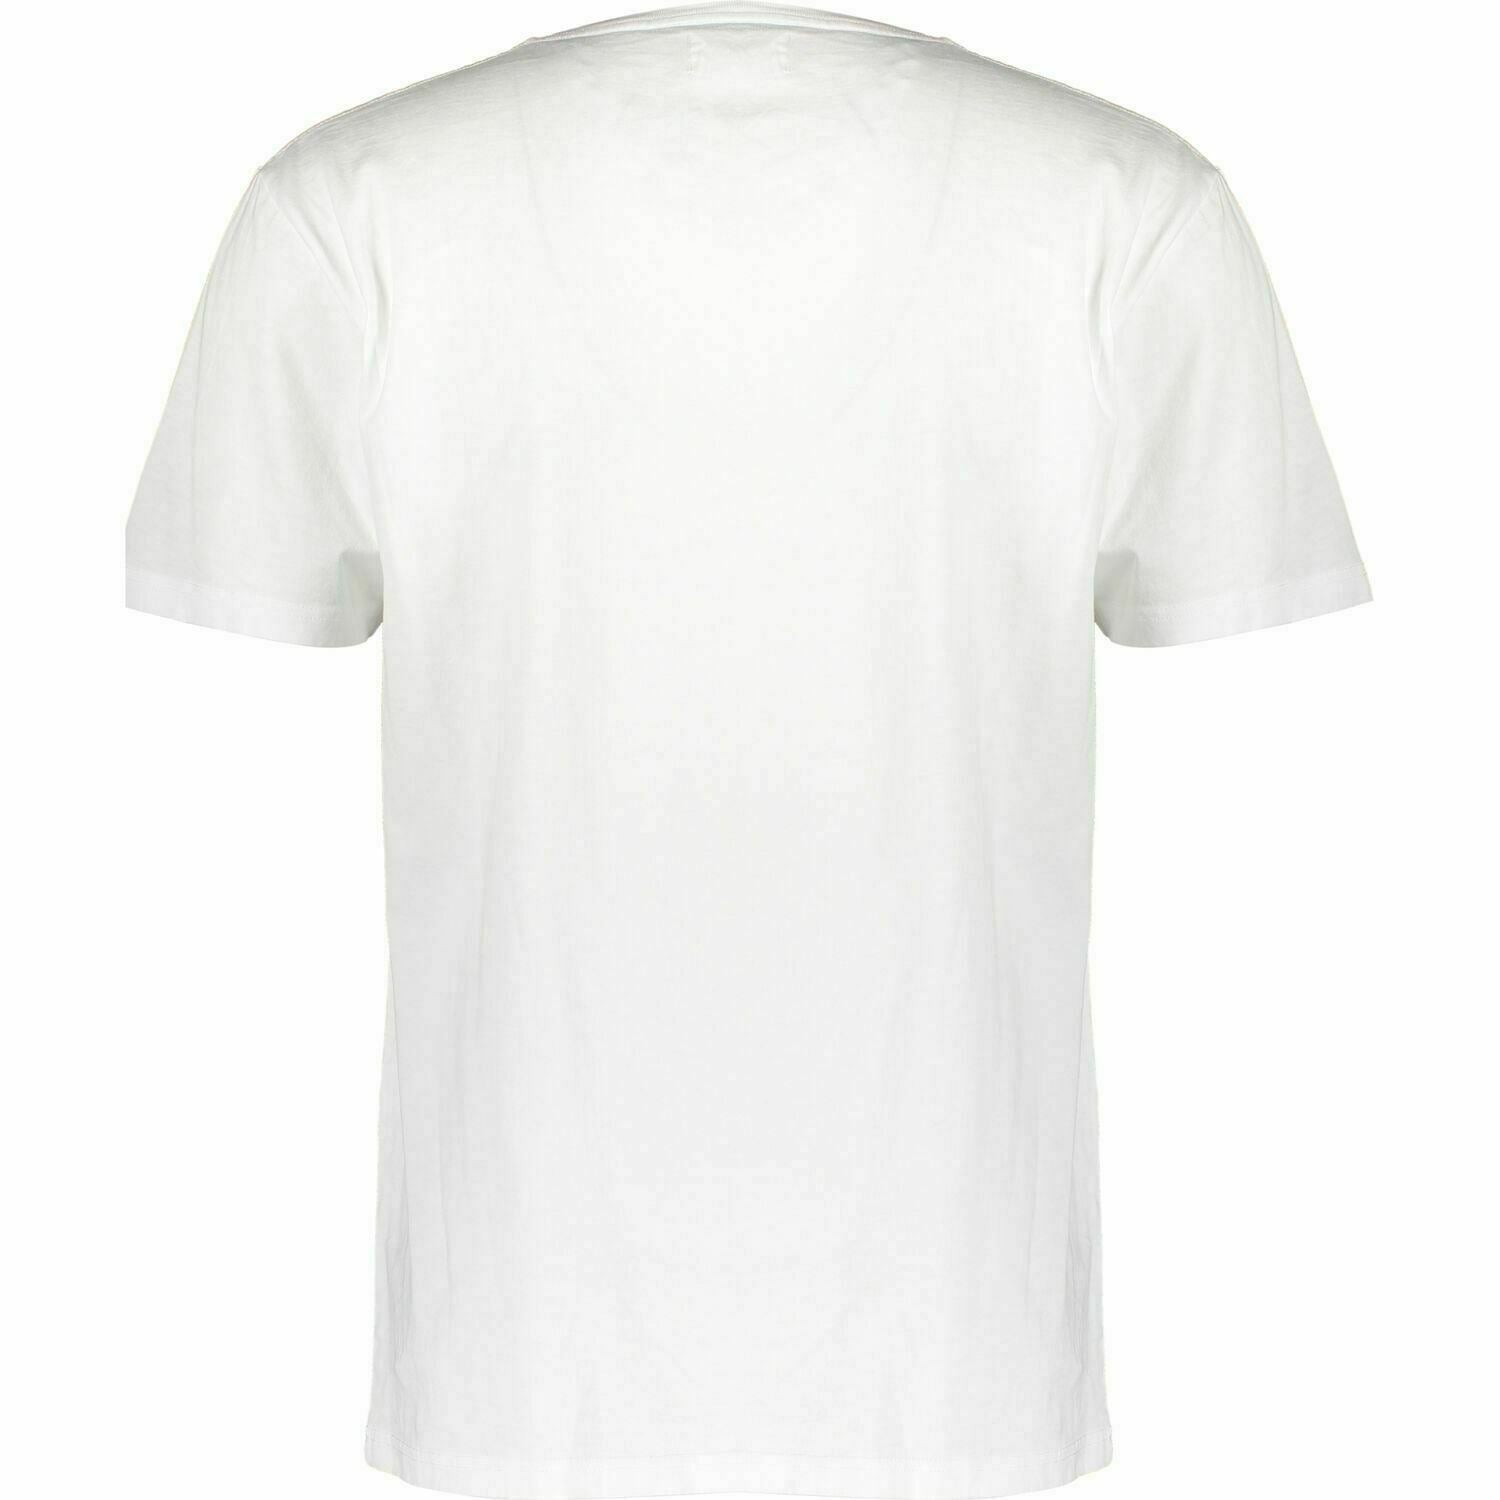 WOOD WOOD Men's "Going Going Gone" Cotton T-shirt, White, size M